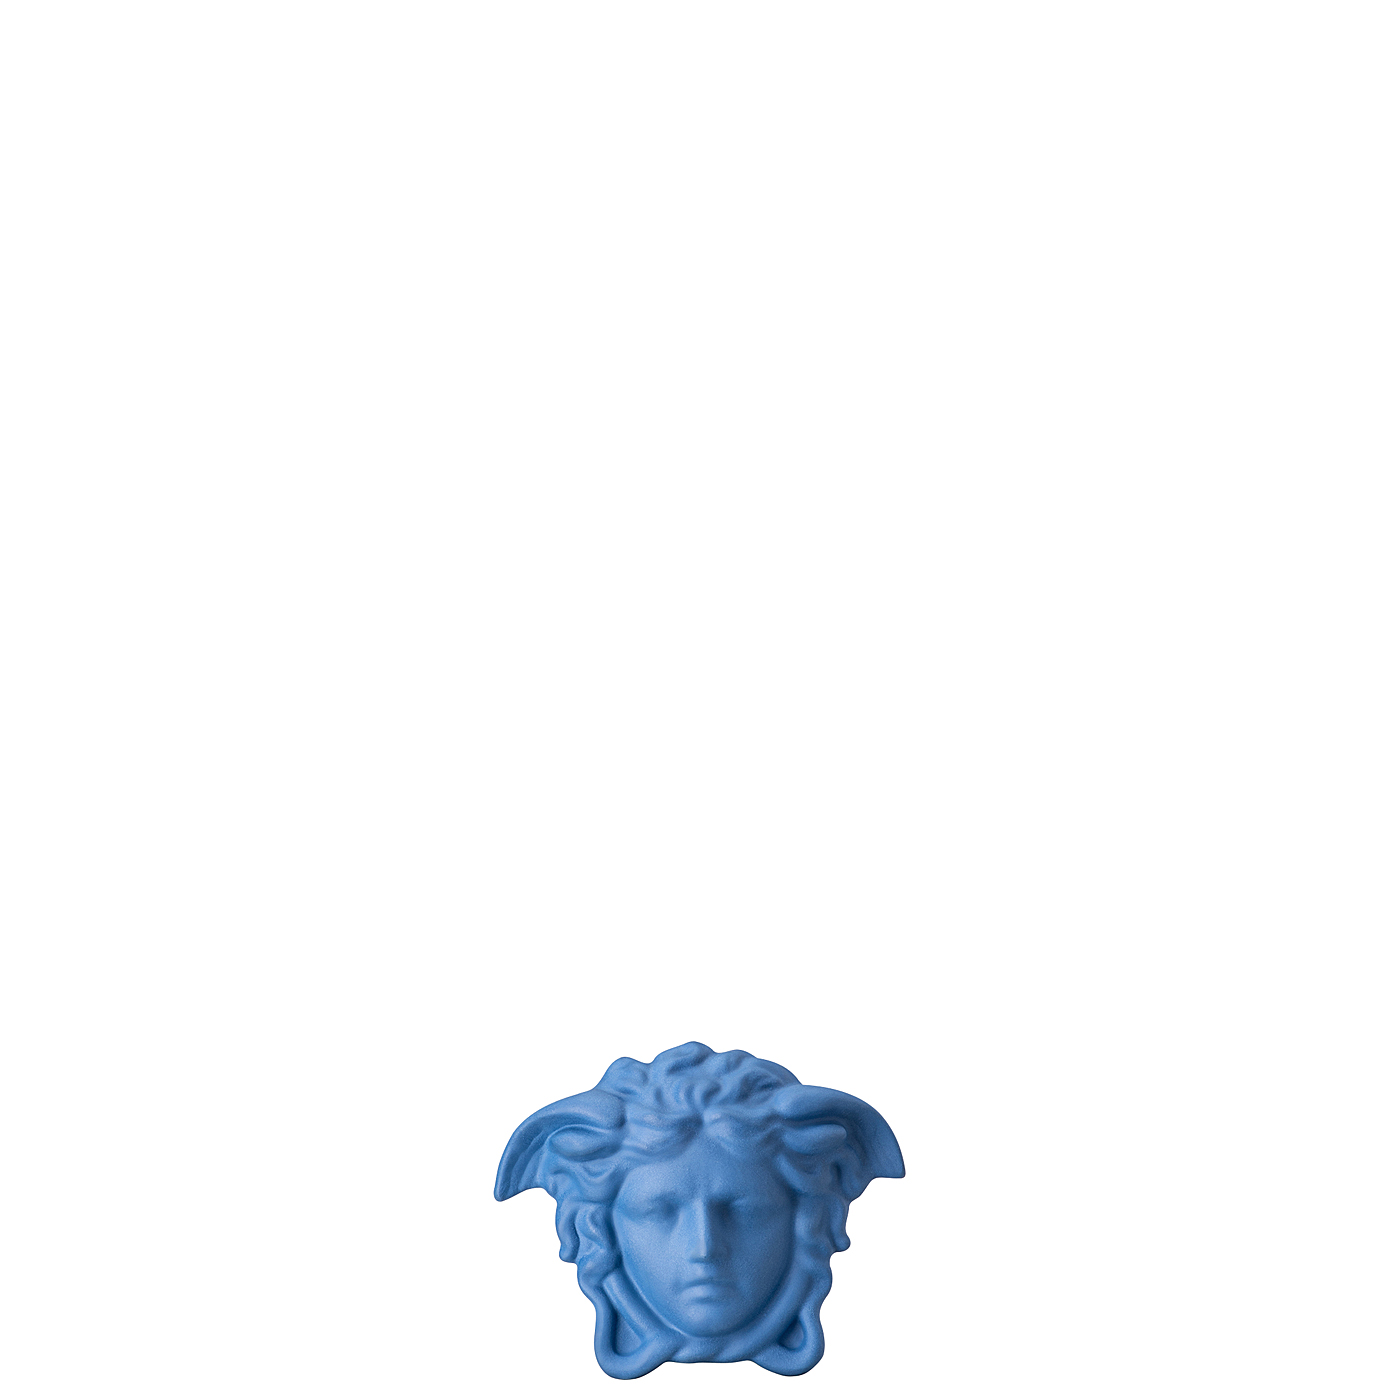 Dose Gypsy Deep blue Versace by Rosenthal